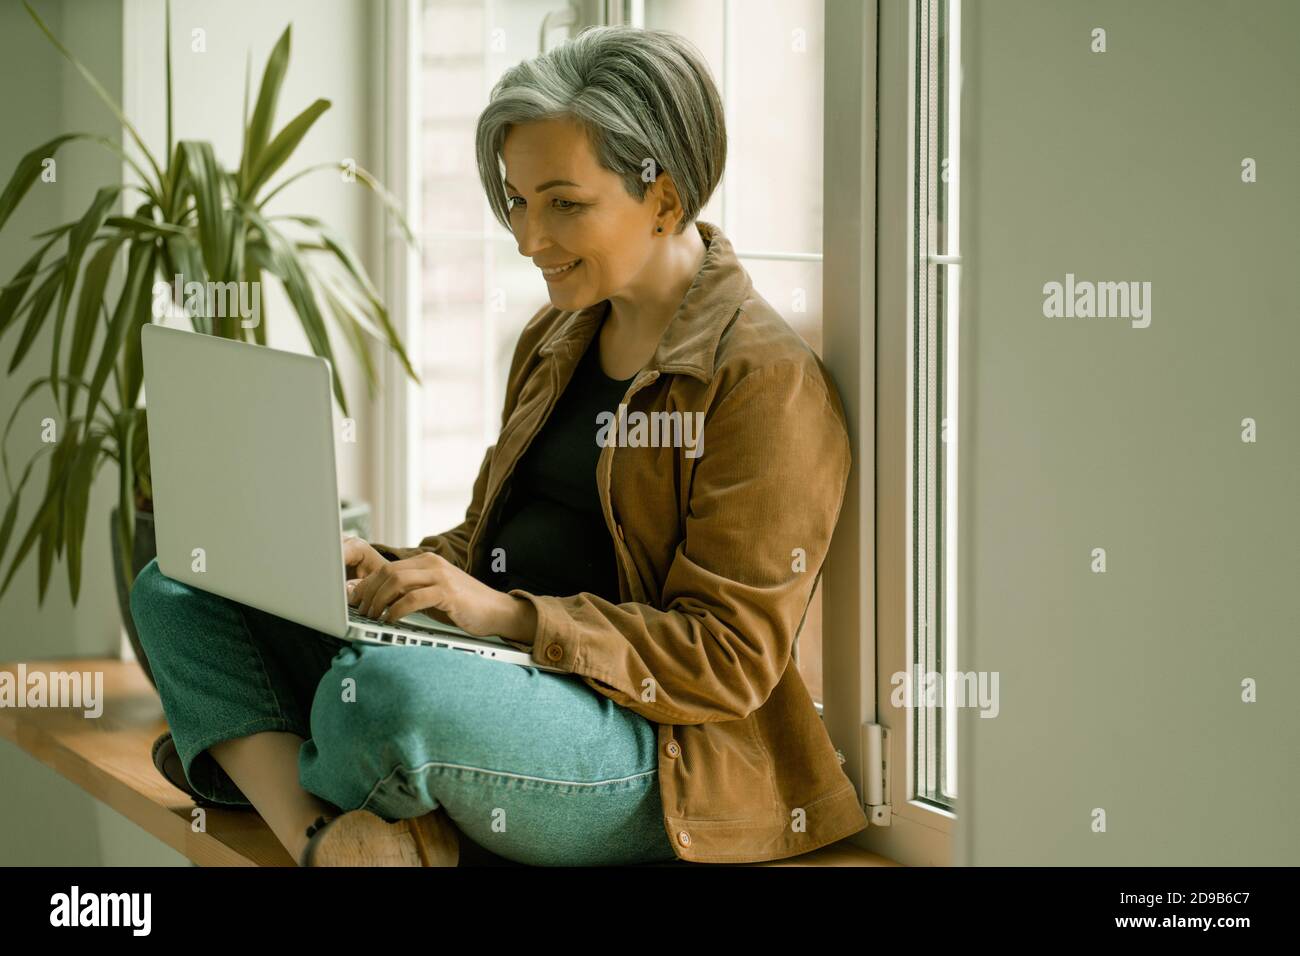 Smiling mature woman looks at web camera taking part in virtual video chat or working with computer or while sitting with her back against window Stock Photo